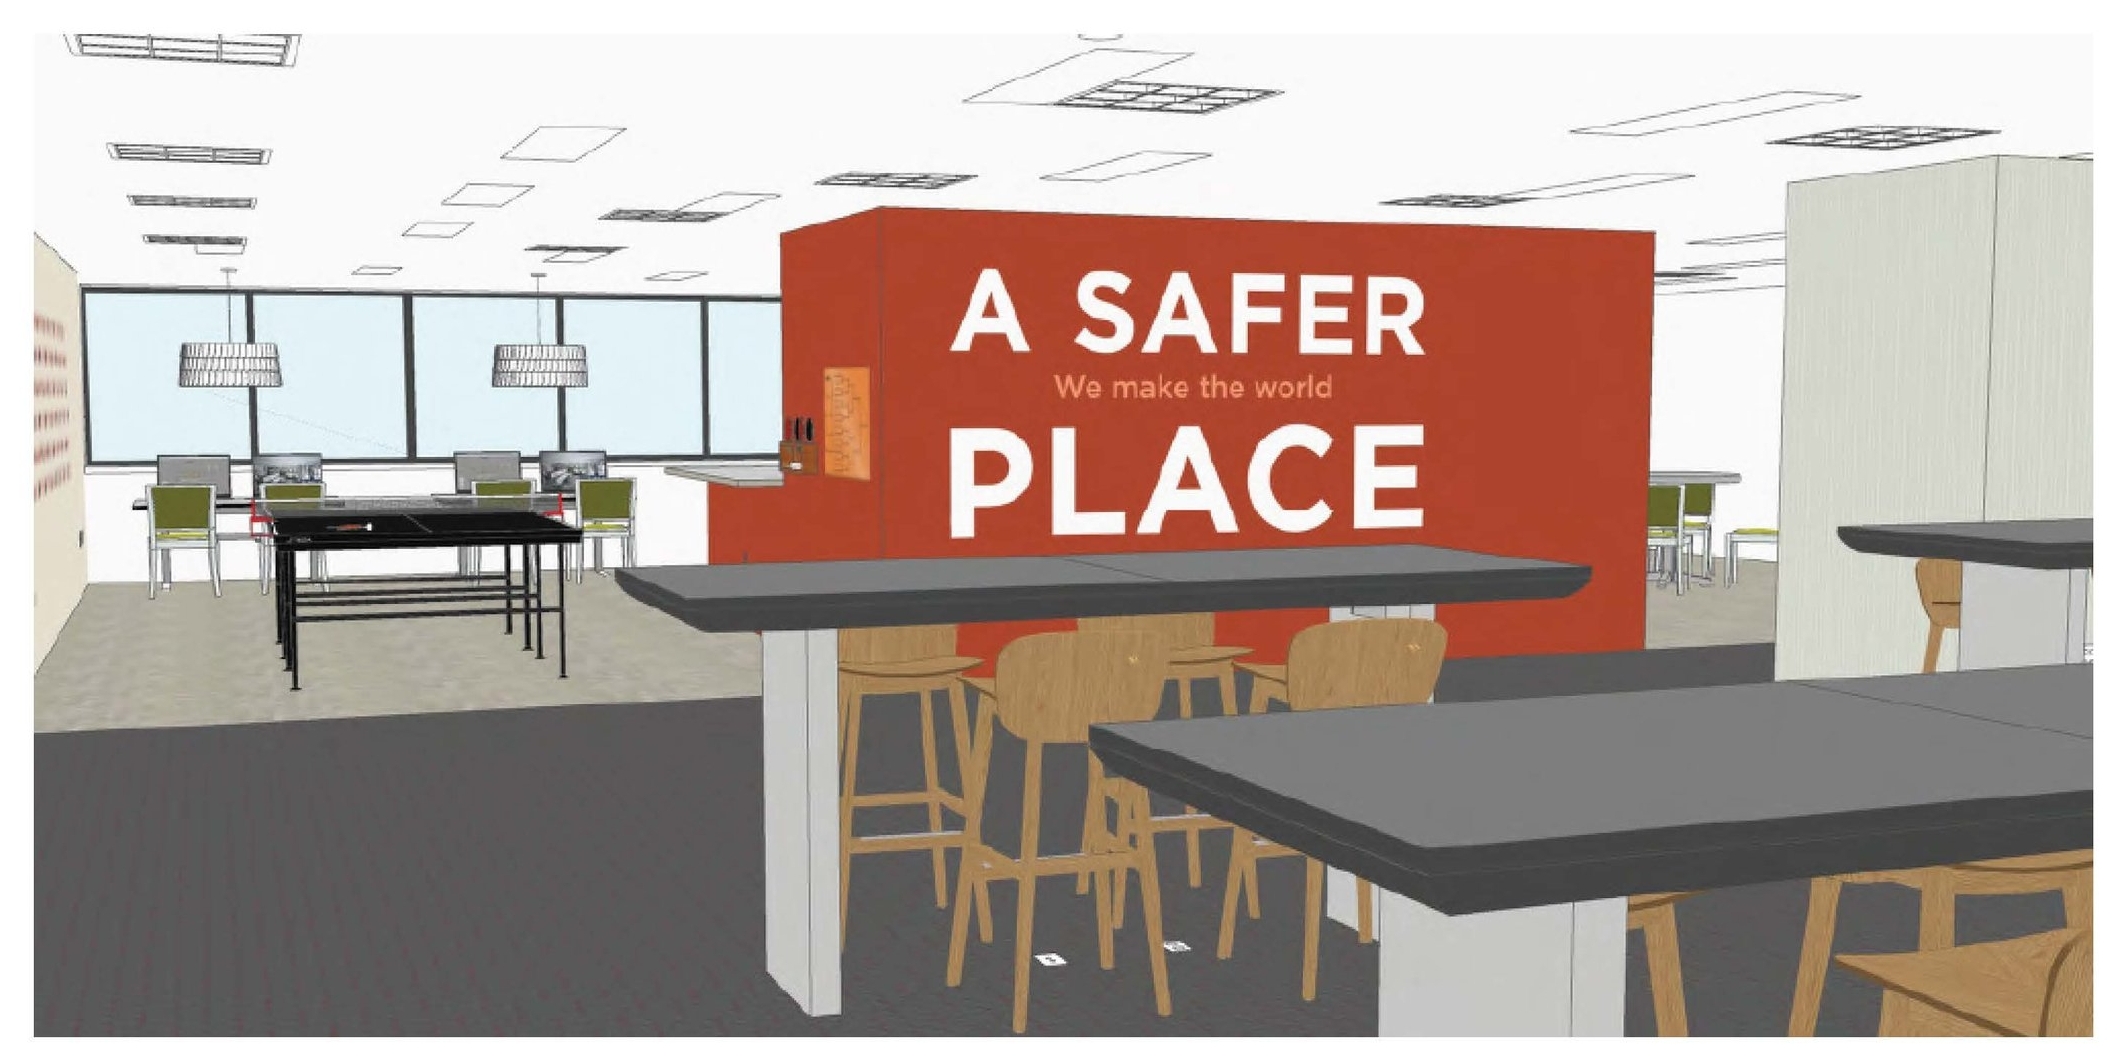  Sketchup views of a branded environment for a private security company 